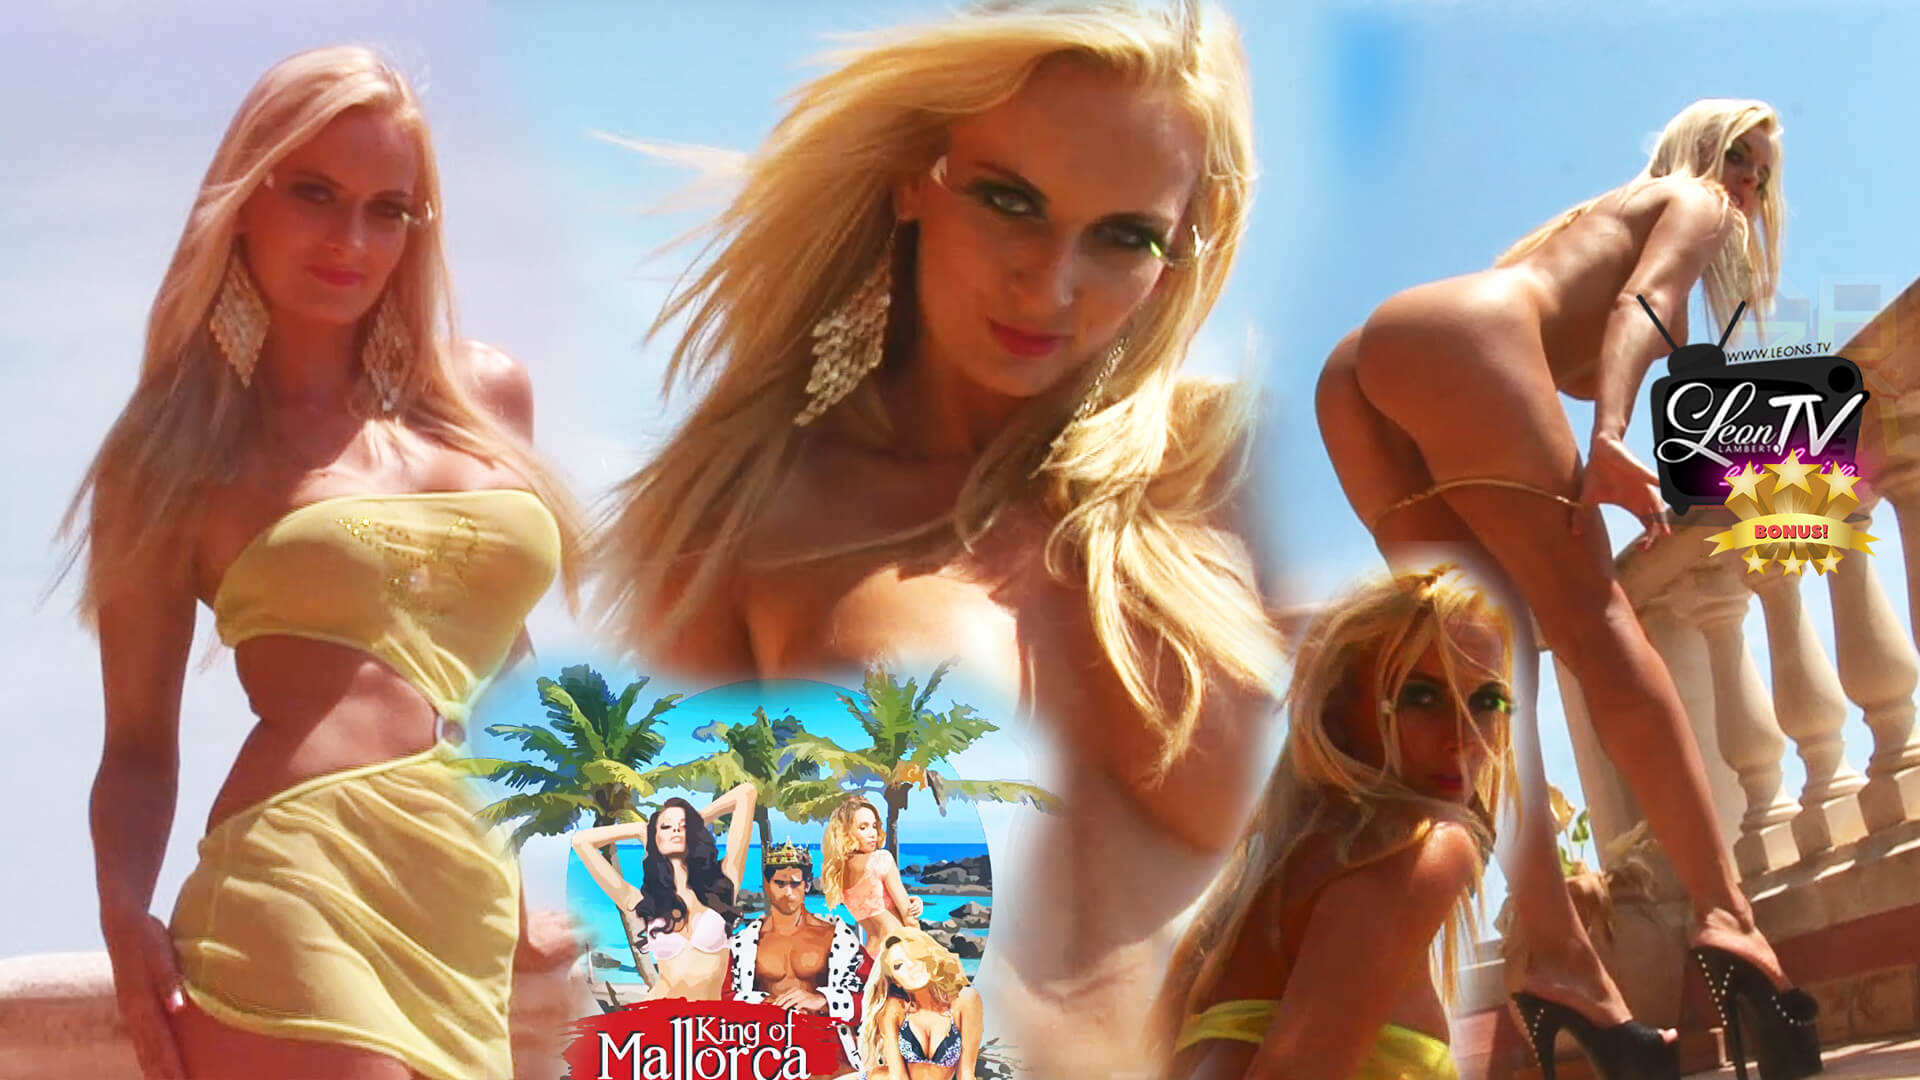 On Hills and High Heels, Blonde Bombshell goes Full Naked, Wild and Under Mallorca´s Sun Hotter than Hell